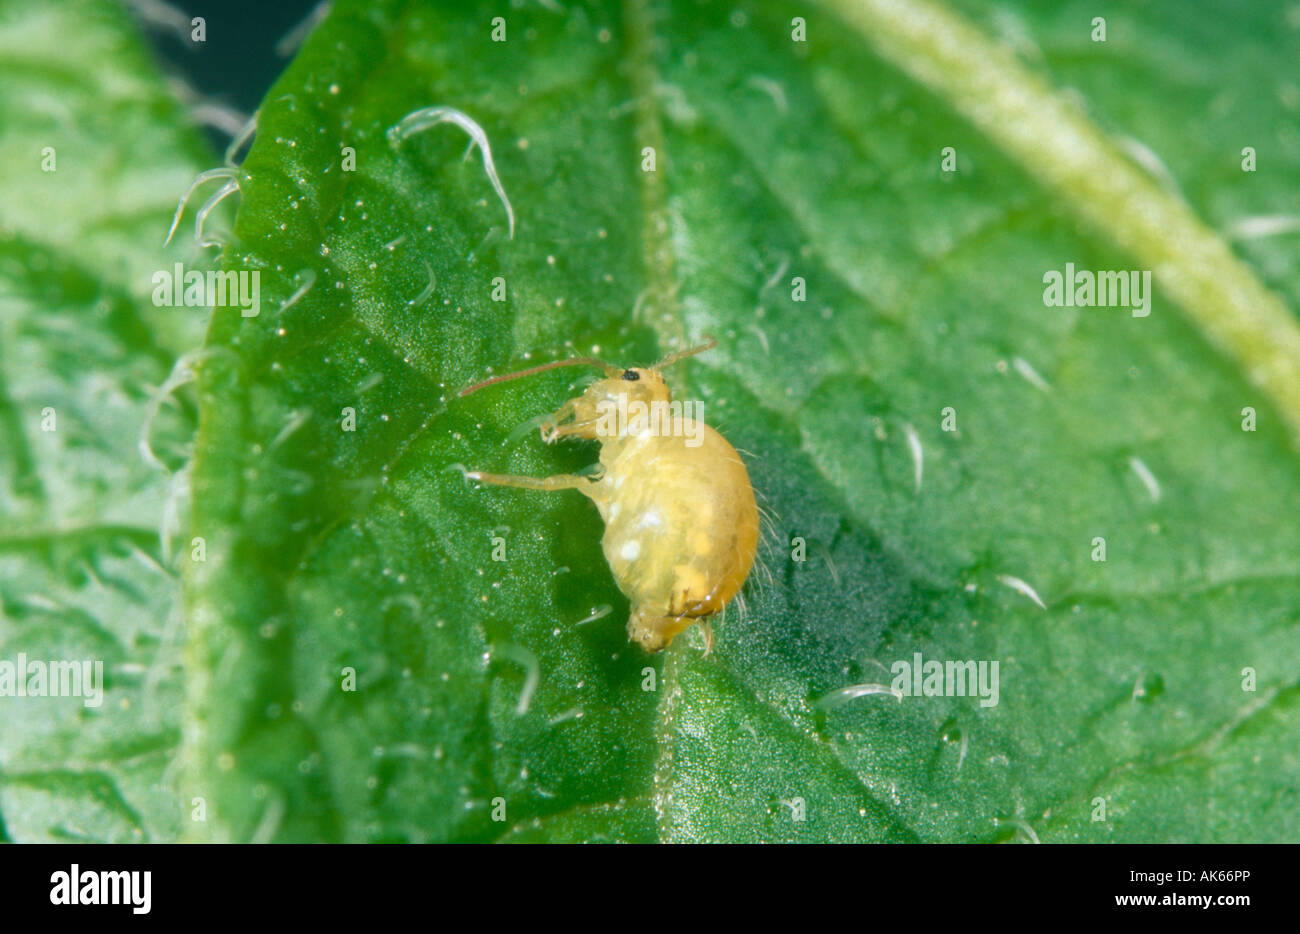 Lucerne flea is a type of springtail which is a pest in southern Australia. Stock Photo